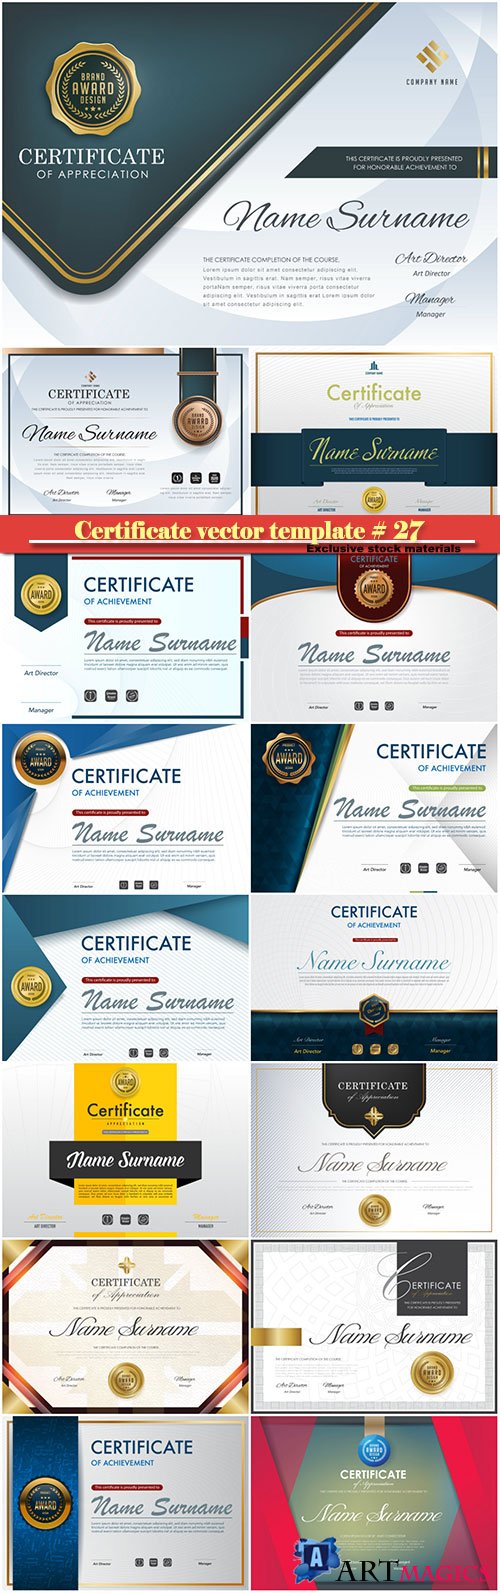 Certificate and vector diploma design template # 27